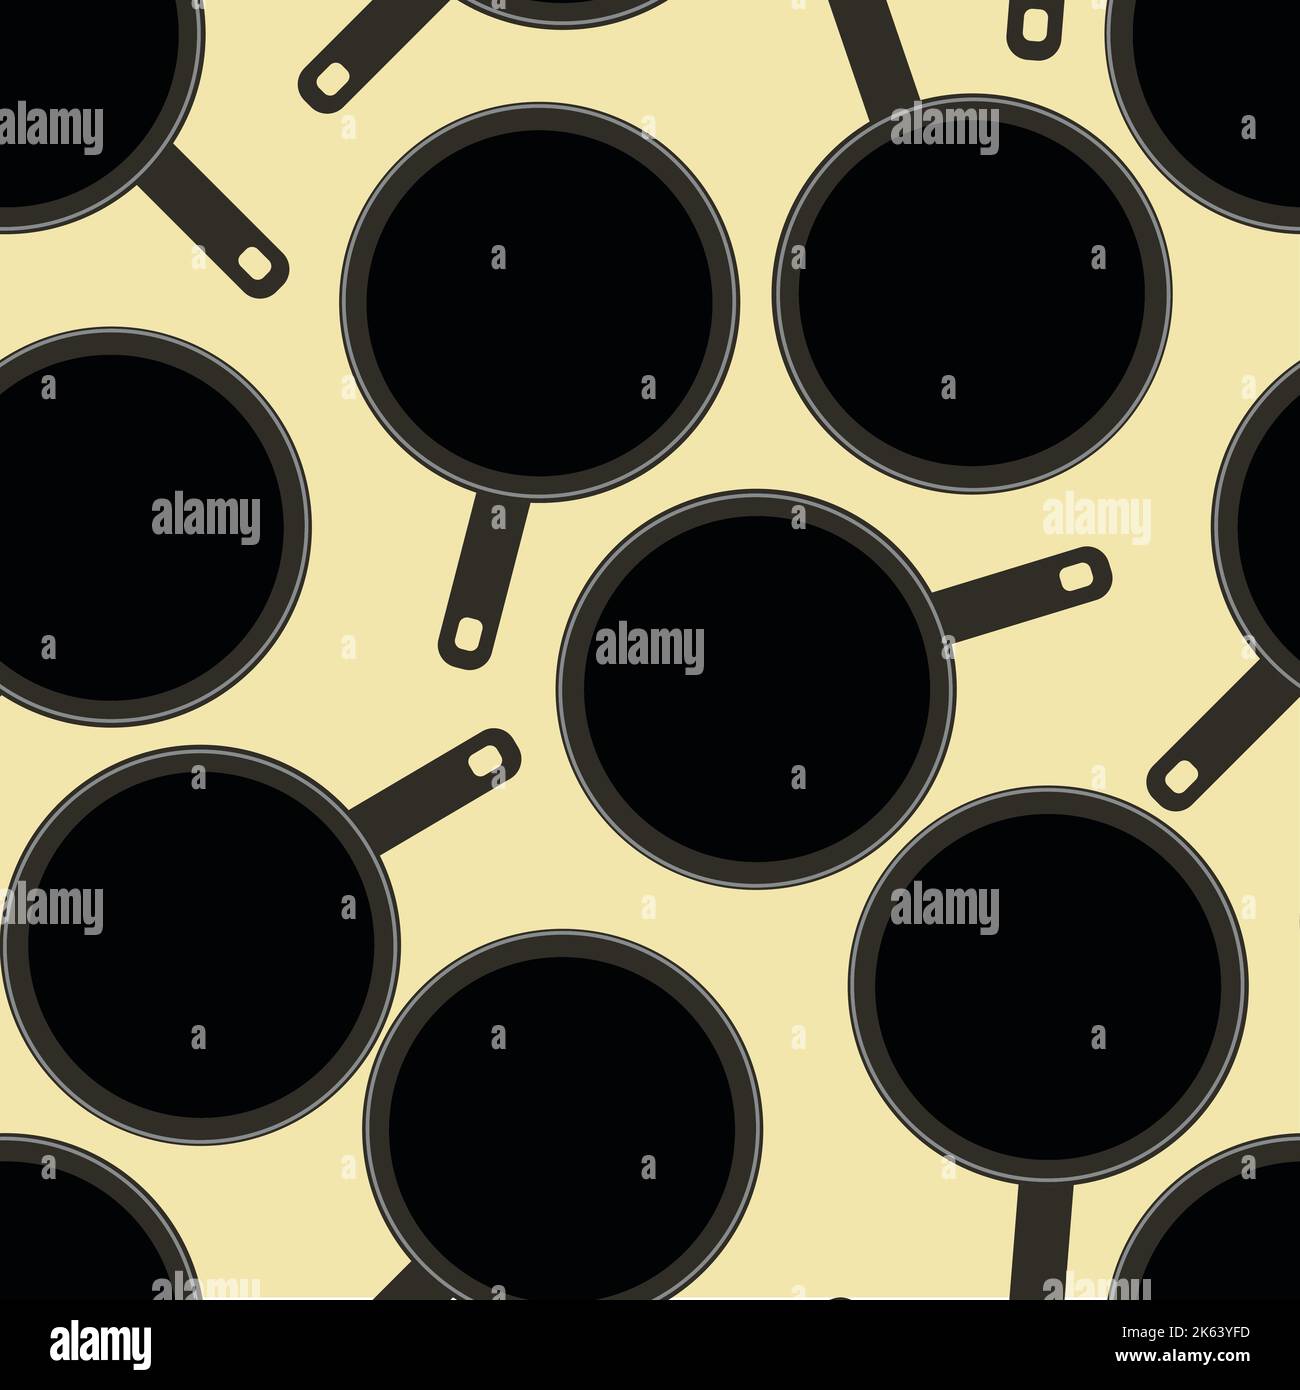 Seamless pattern with frying pans Stock Vector